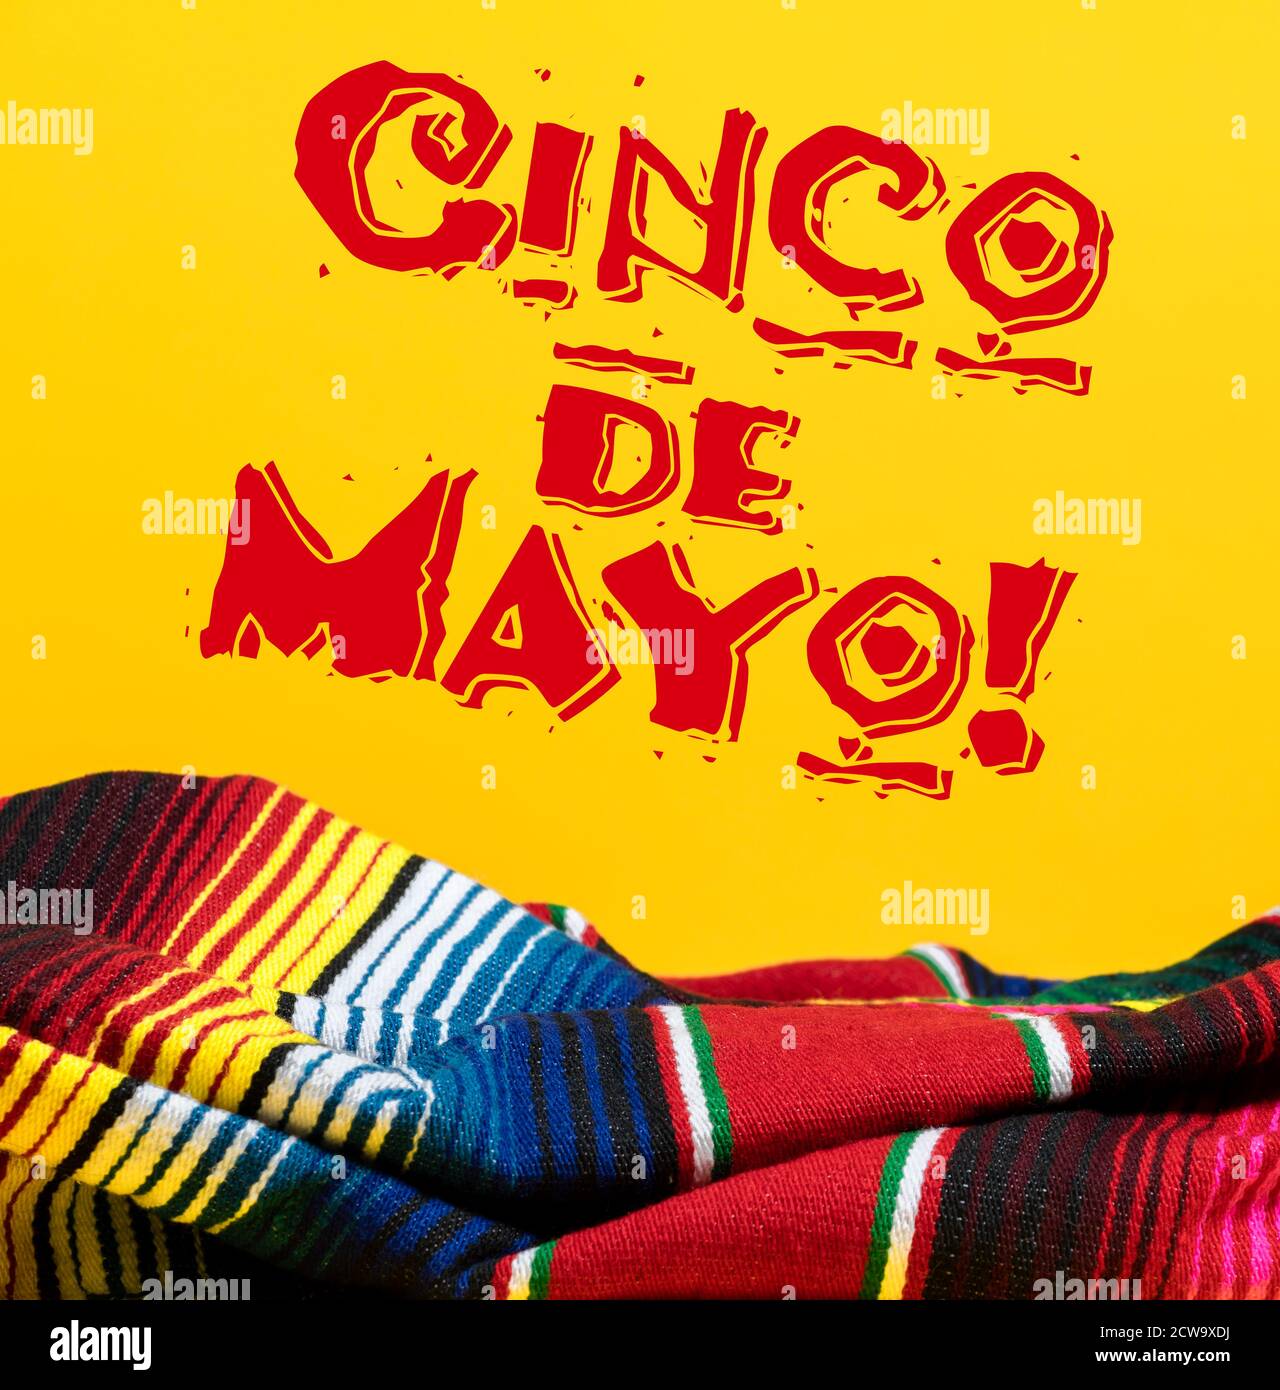 Mexican Serape blanket on yellow background with Cinco de Mayo.  Stock Photo